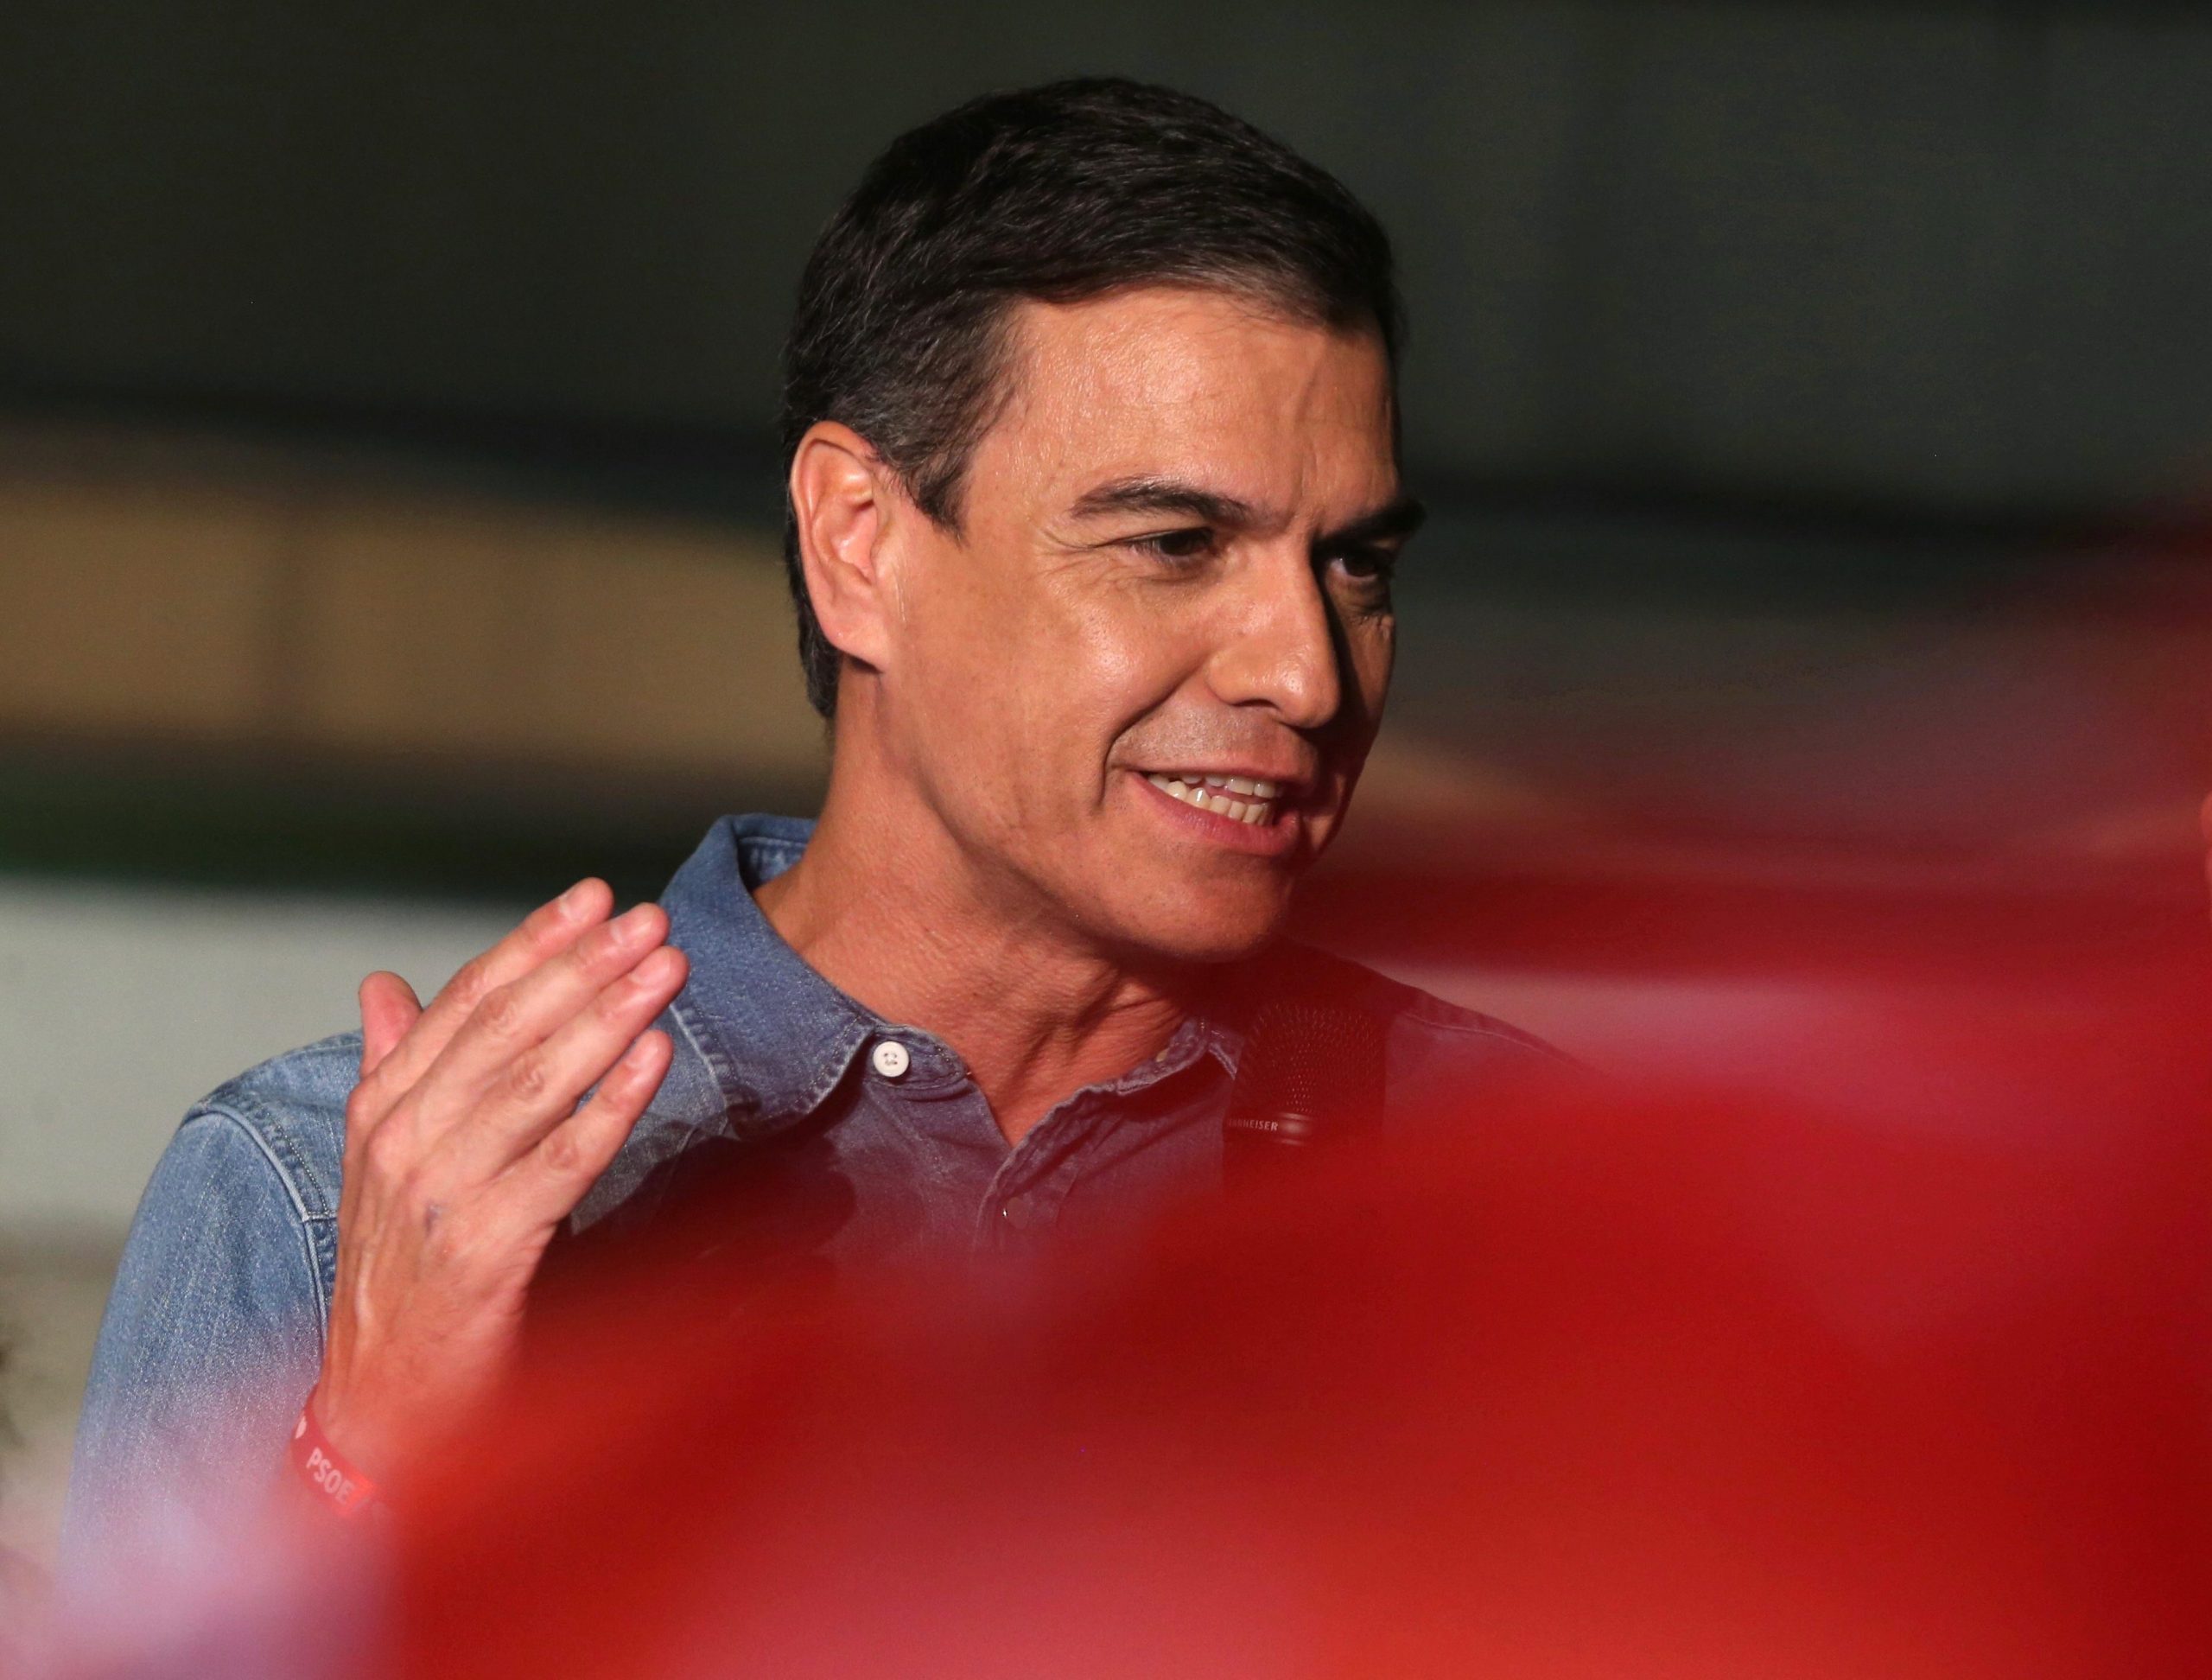 Pedro Sanchez says he will try to form new government in Spain and woos regional party support with promises of EU official language recognition